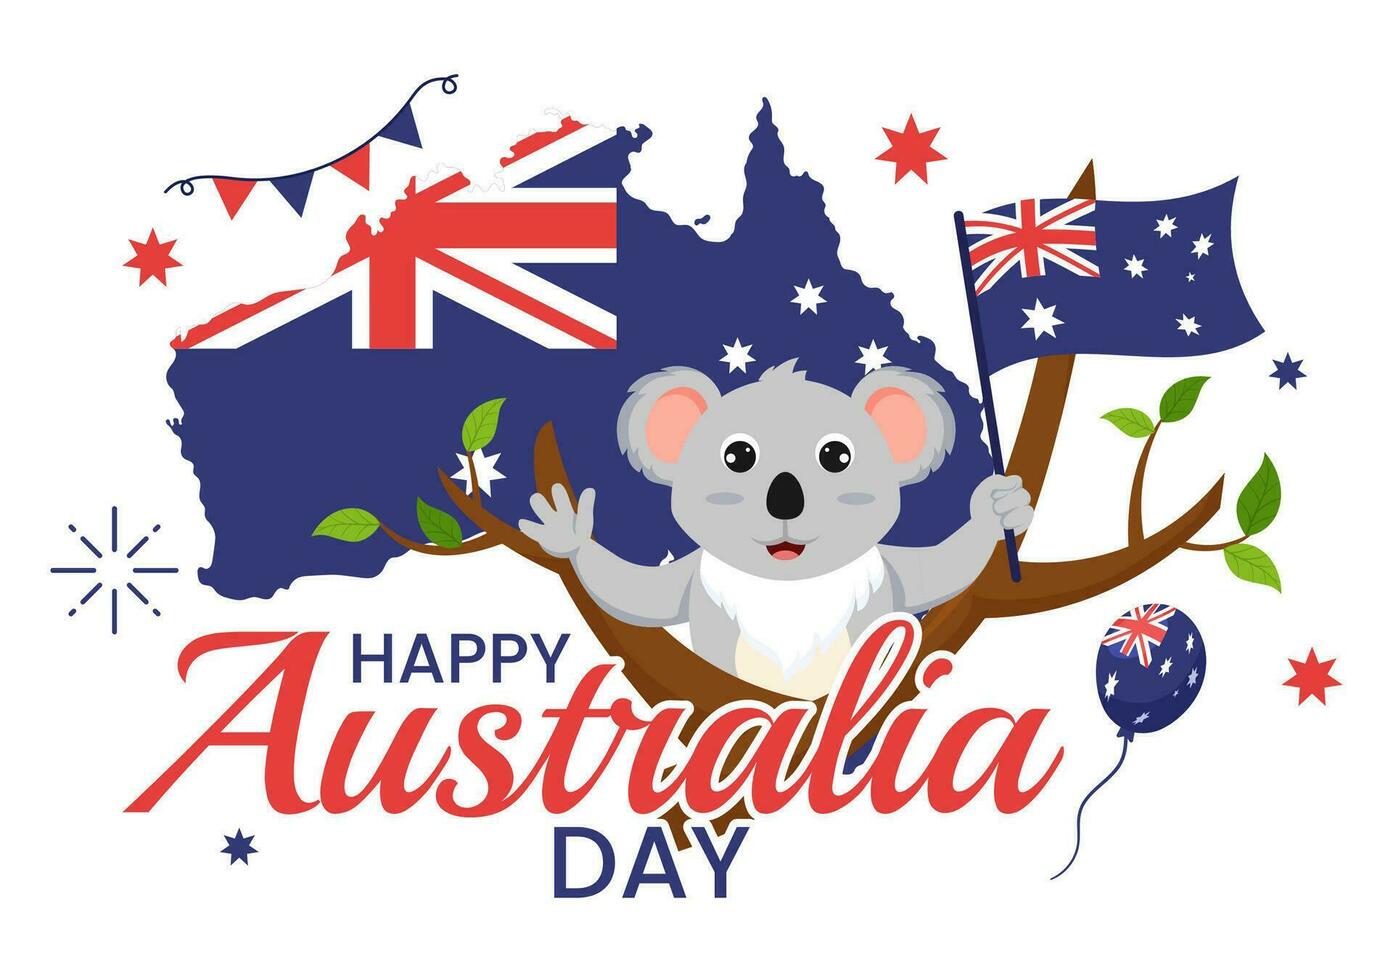 Happy Australia Day Vector Illustration on 26 January with Map and Australian Flag for Banner or Poster in Flat Cartoon Background Design